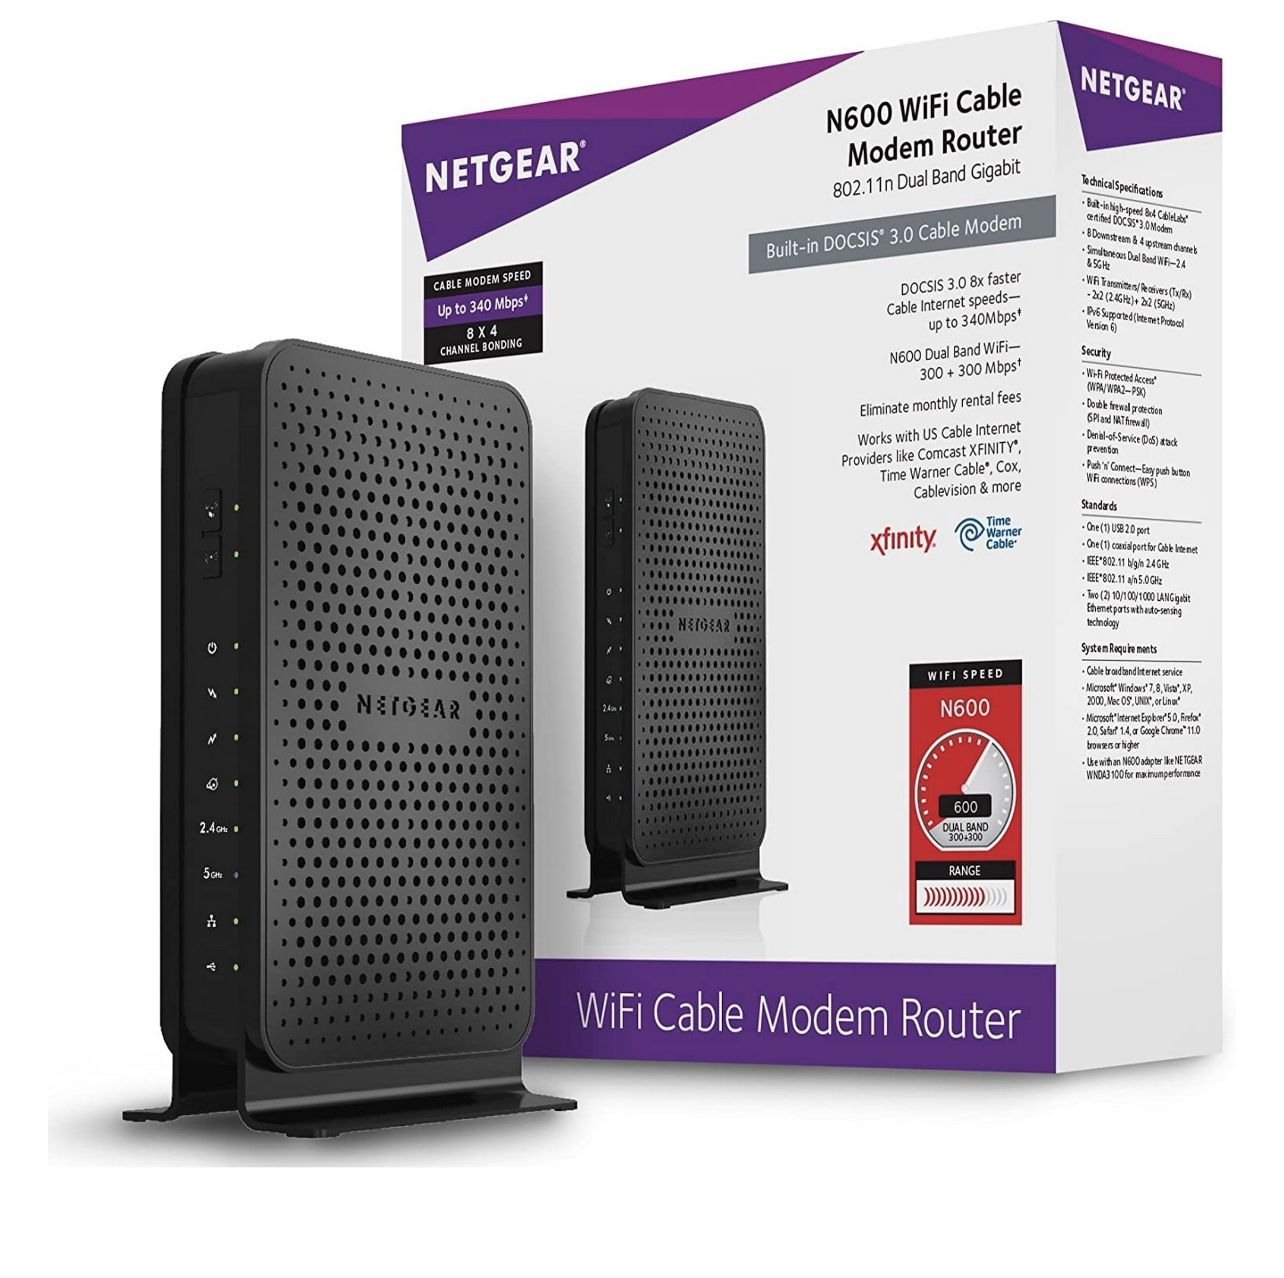 Netgear N600 8 x 4 WiFi Cable Modem and Router; Certified for XFINITY by Comcast, Spectrum, Cox, and more (C3700-100NAS)